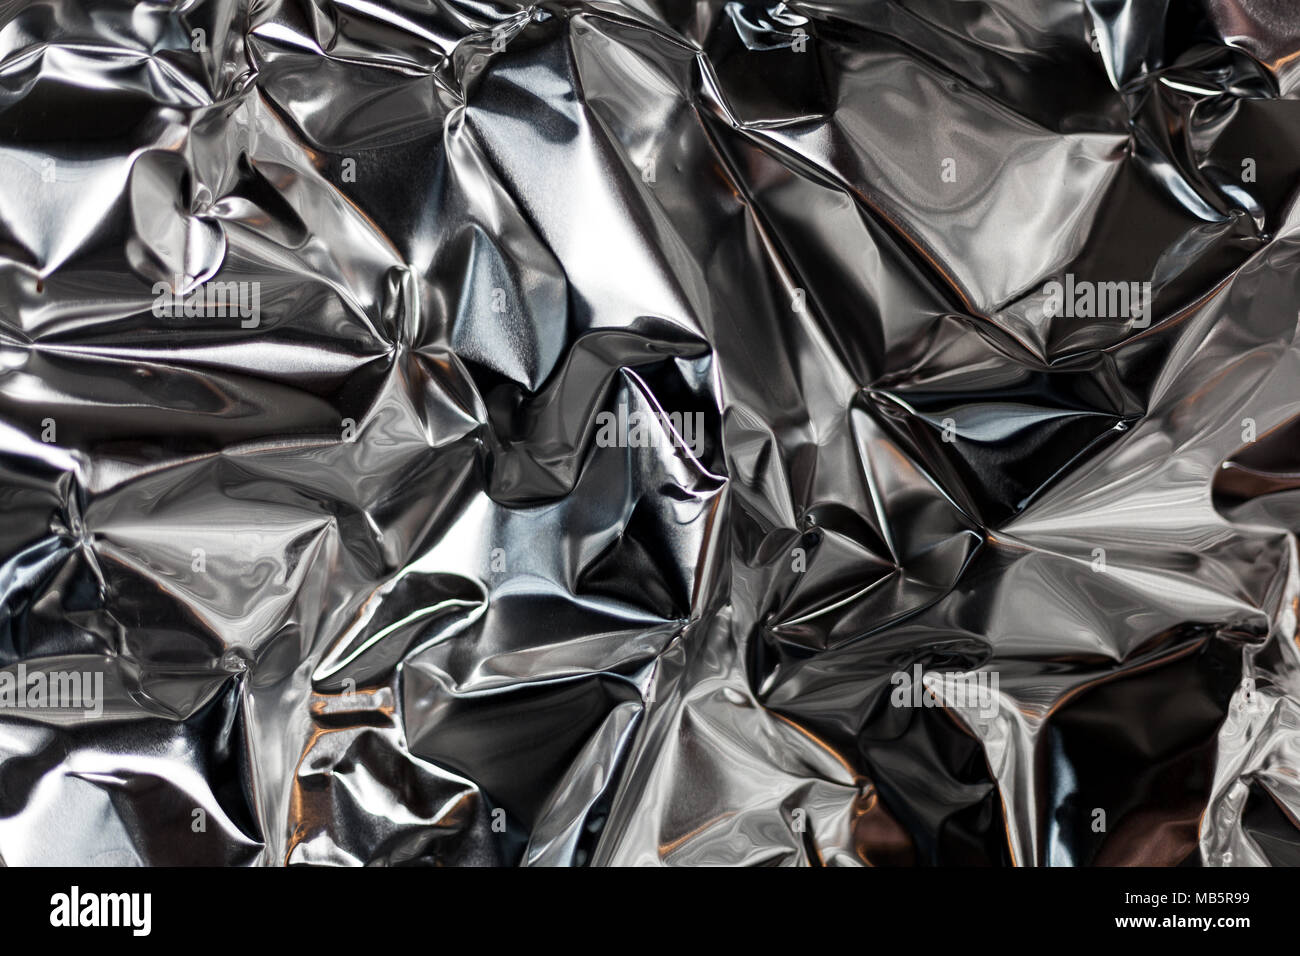 https://c8.alamy.com/comp/MB5R99/full-frame-take-of-a-sheet-of-crumpled-silver-aluminum-foil-background-MB5R99.jpg